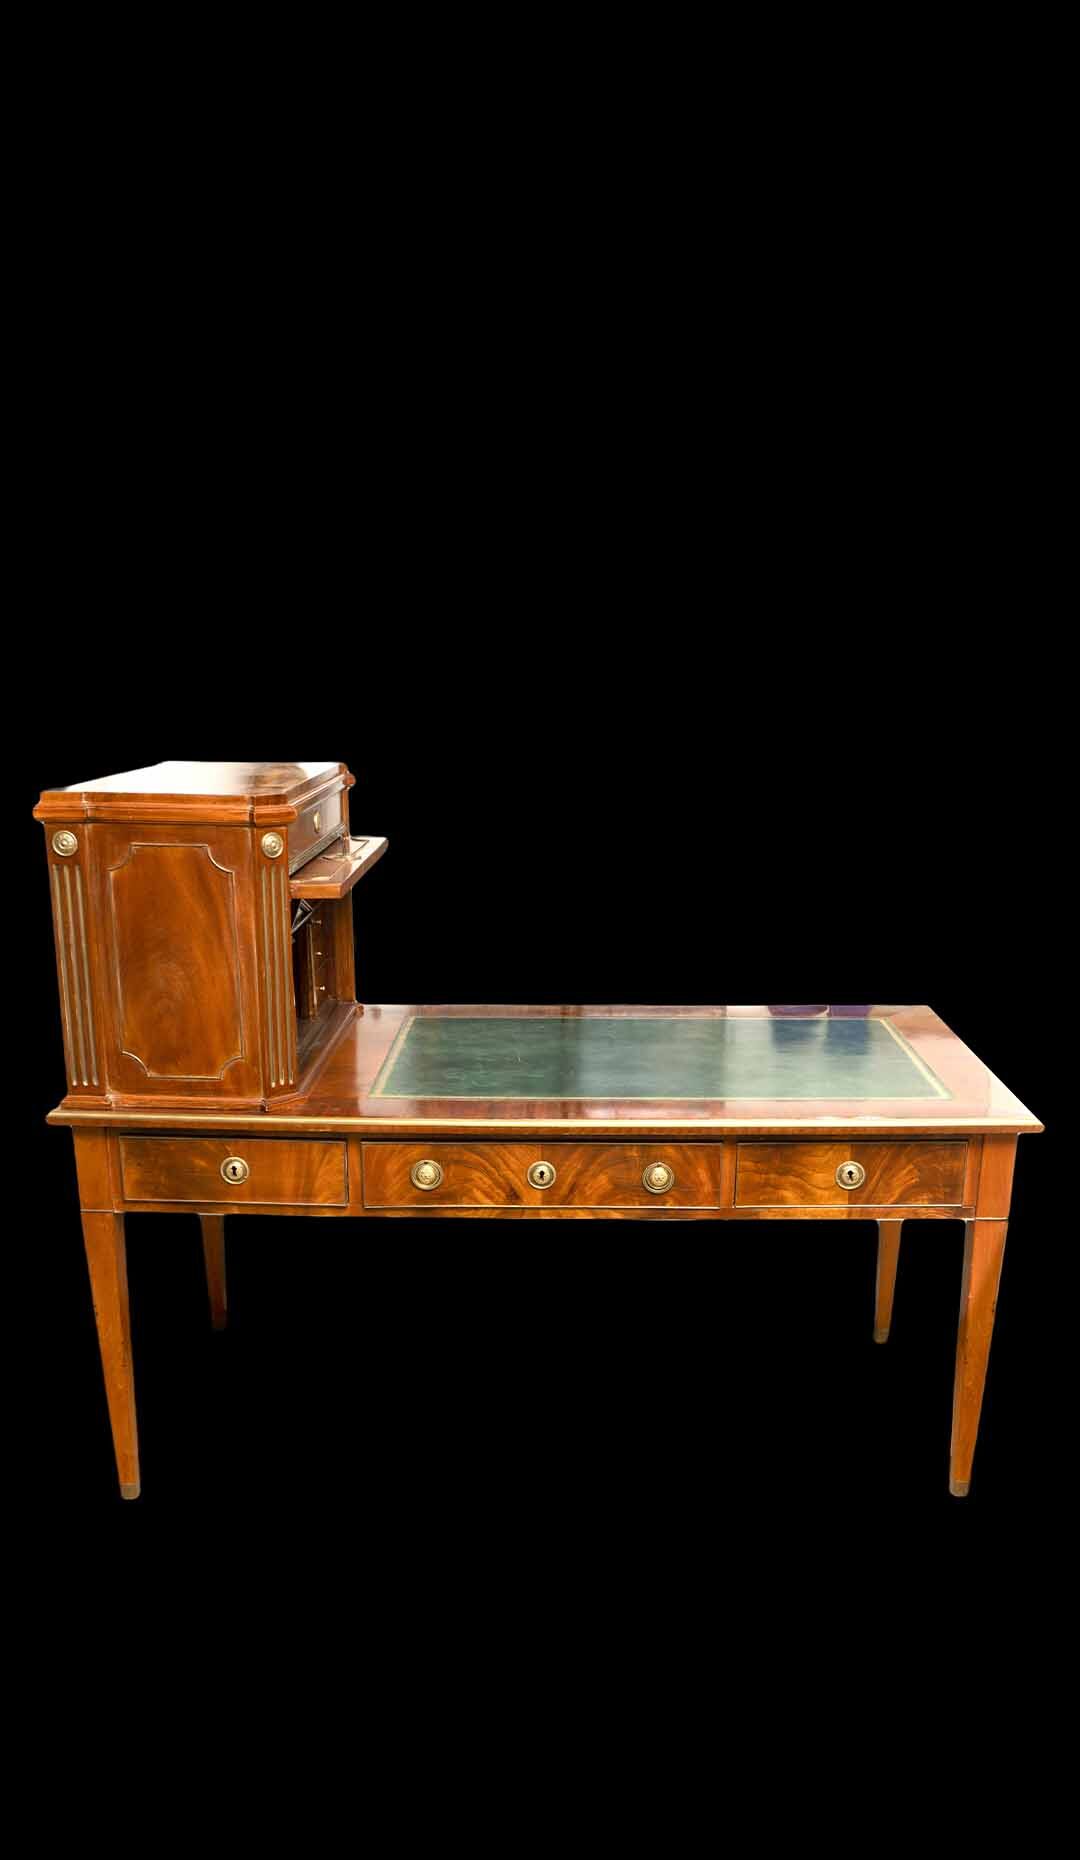 Gilt and Bronze Mounted Mahogany Leather Topped Writing Desk